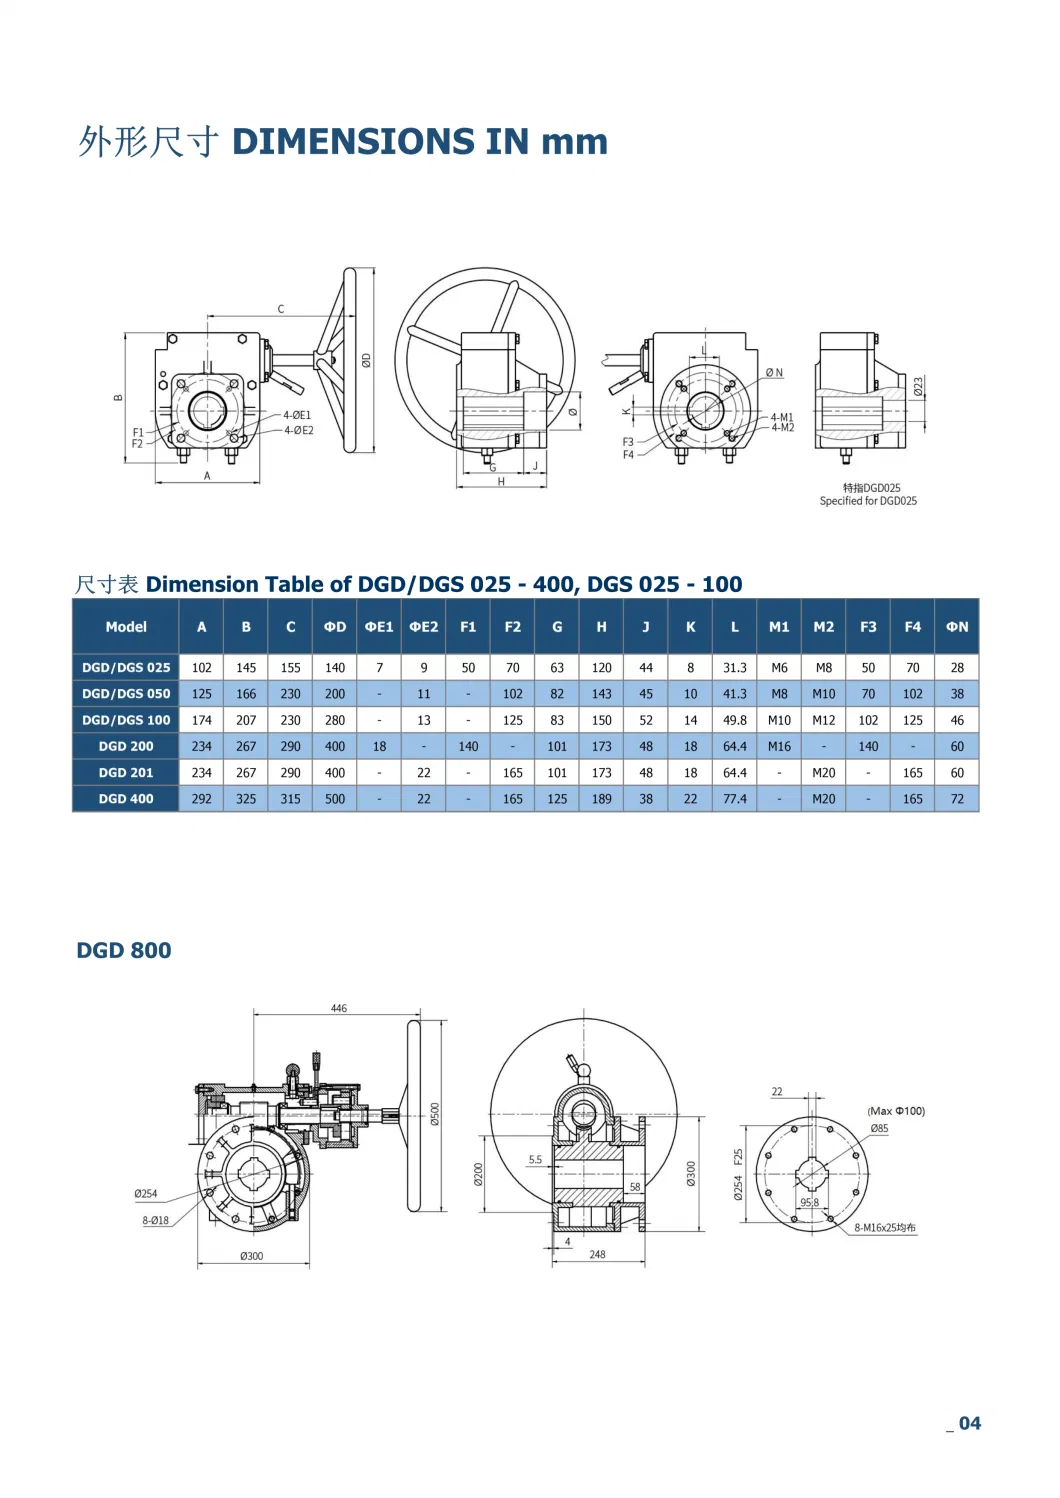 CE Alpha Stainless Steel Manual Gear Box with Actuator for Ball Valve